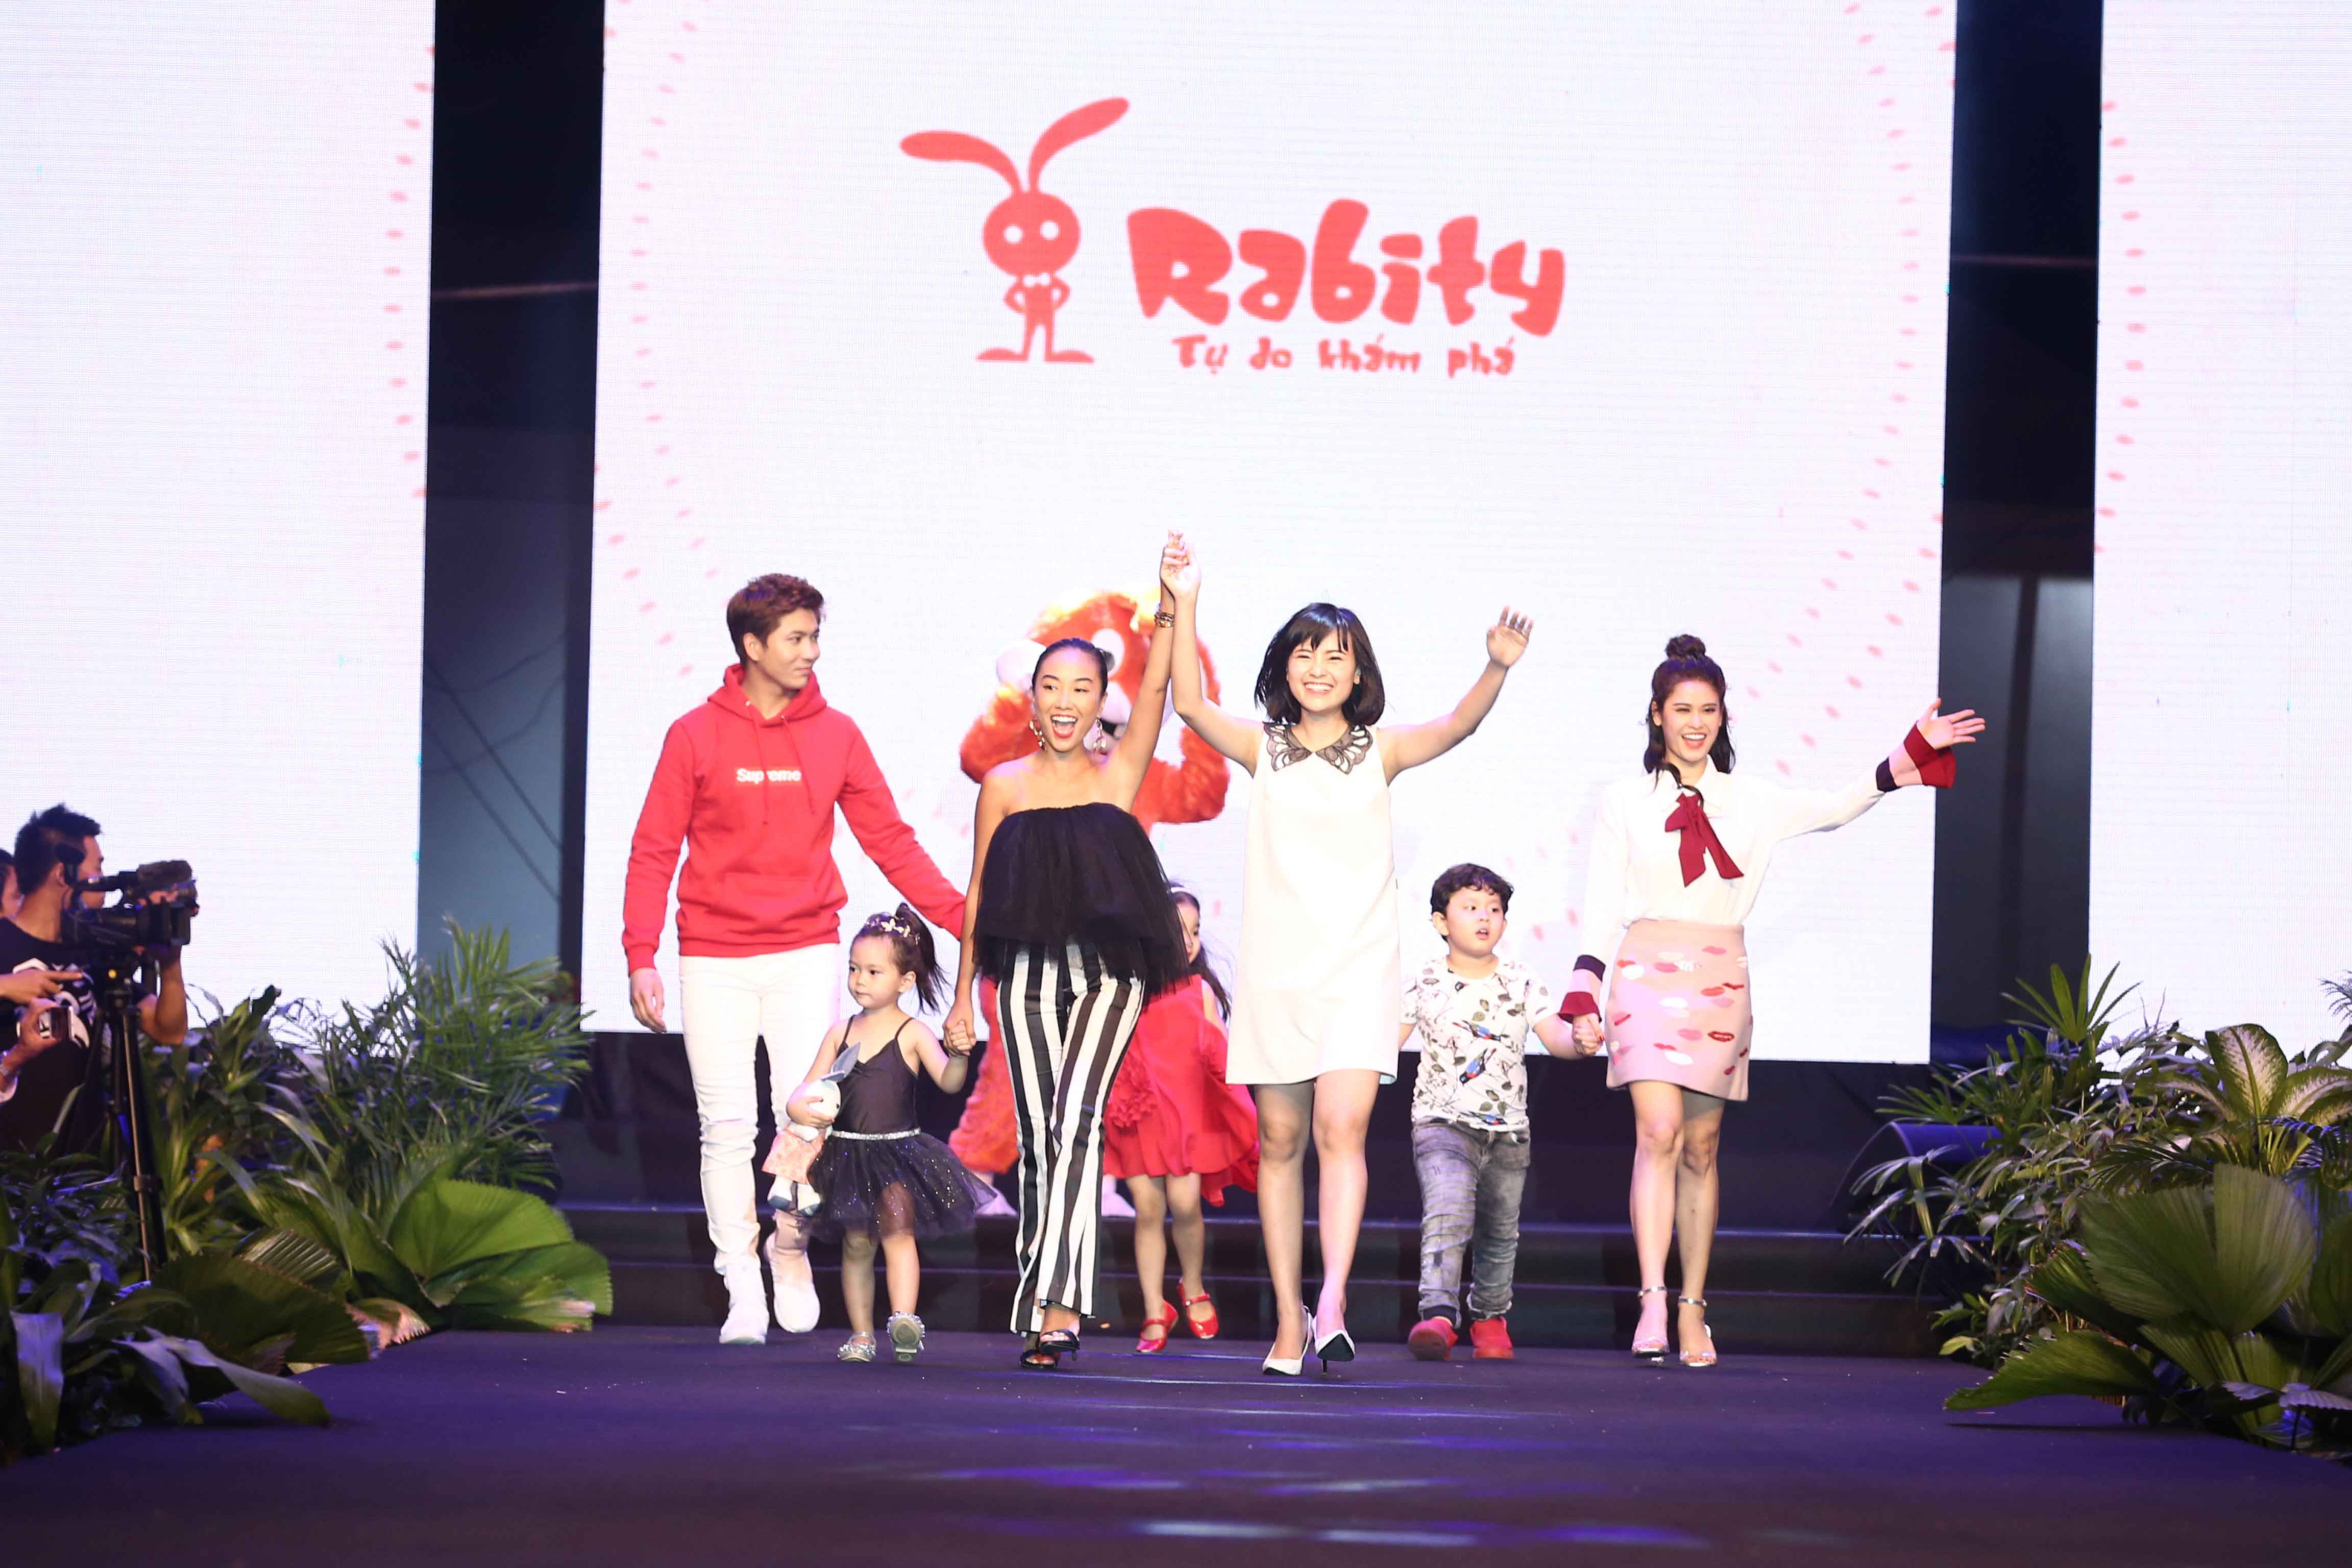 Tran Hong Hanh joins her models on the catwalk while promoting Rabity Retail's new line.